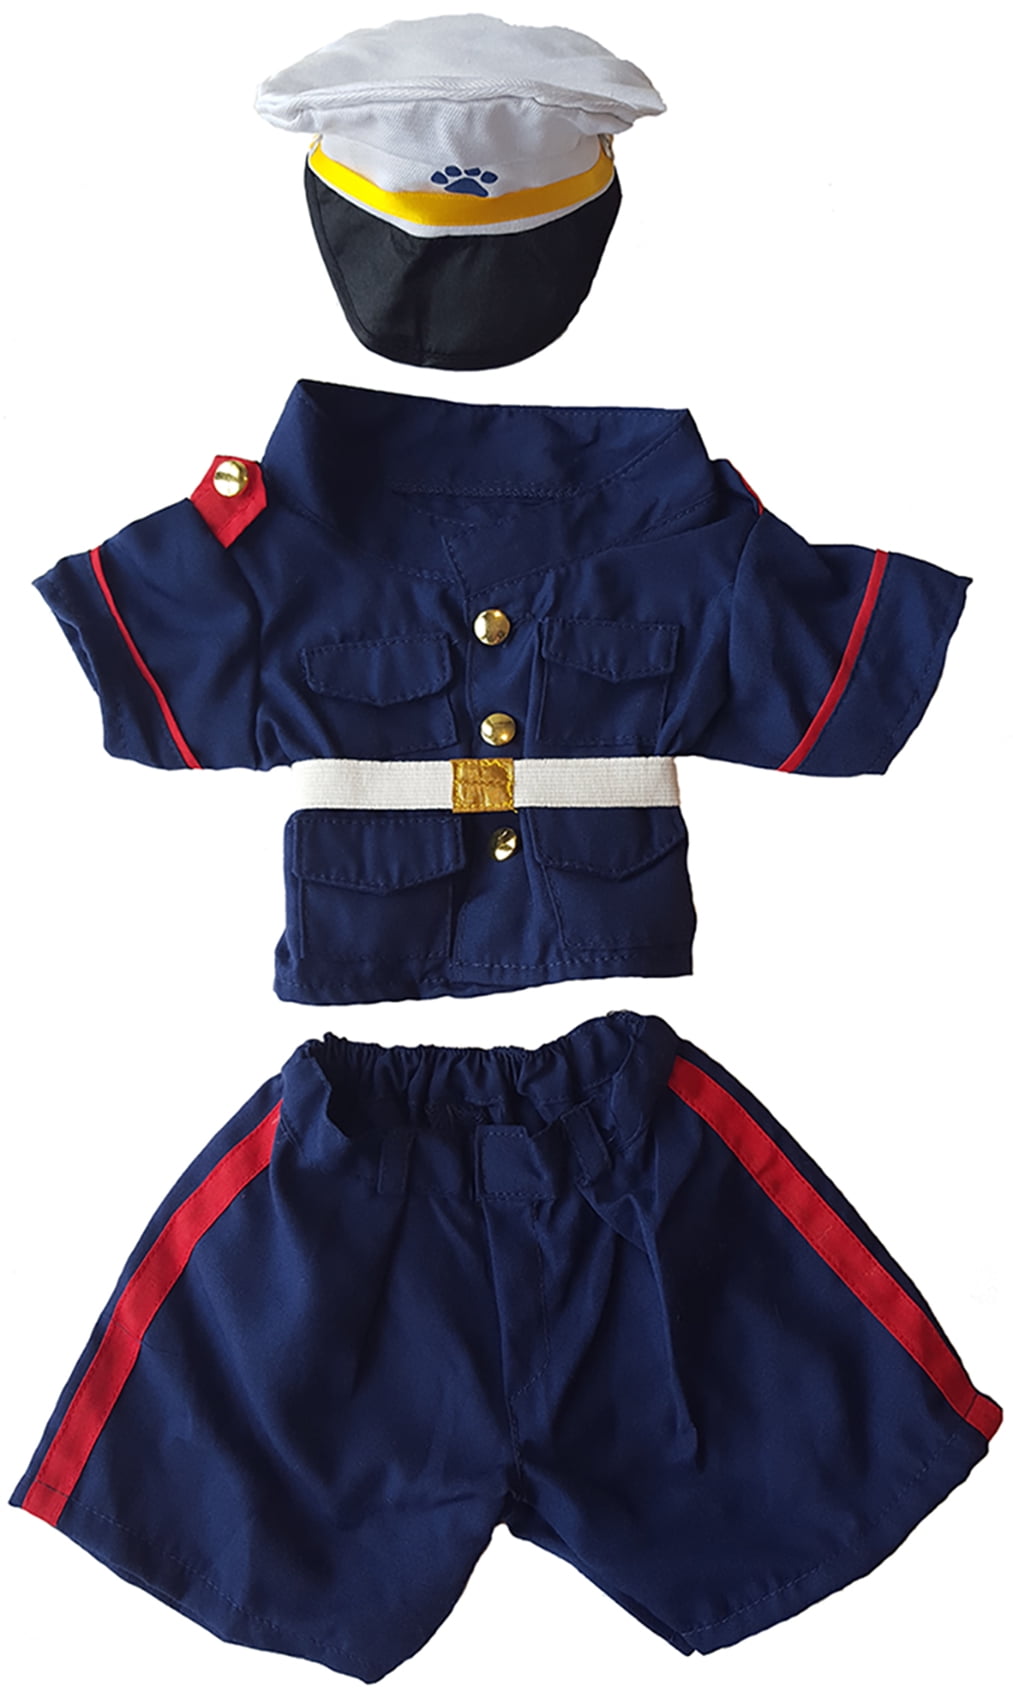 U.S. Marines Dress Blues Outfit Teddy Bear Clothes Fits Most 14 - 18 Build -a-bear and Make Your Own Stuffed Animals 